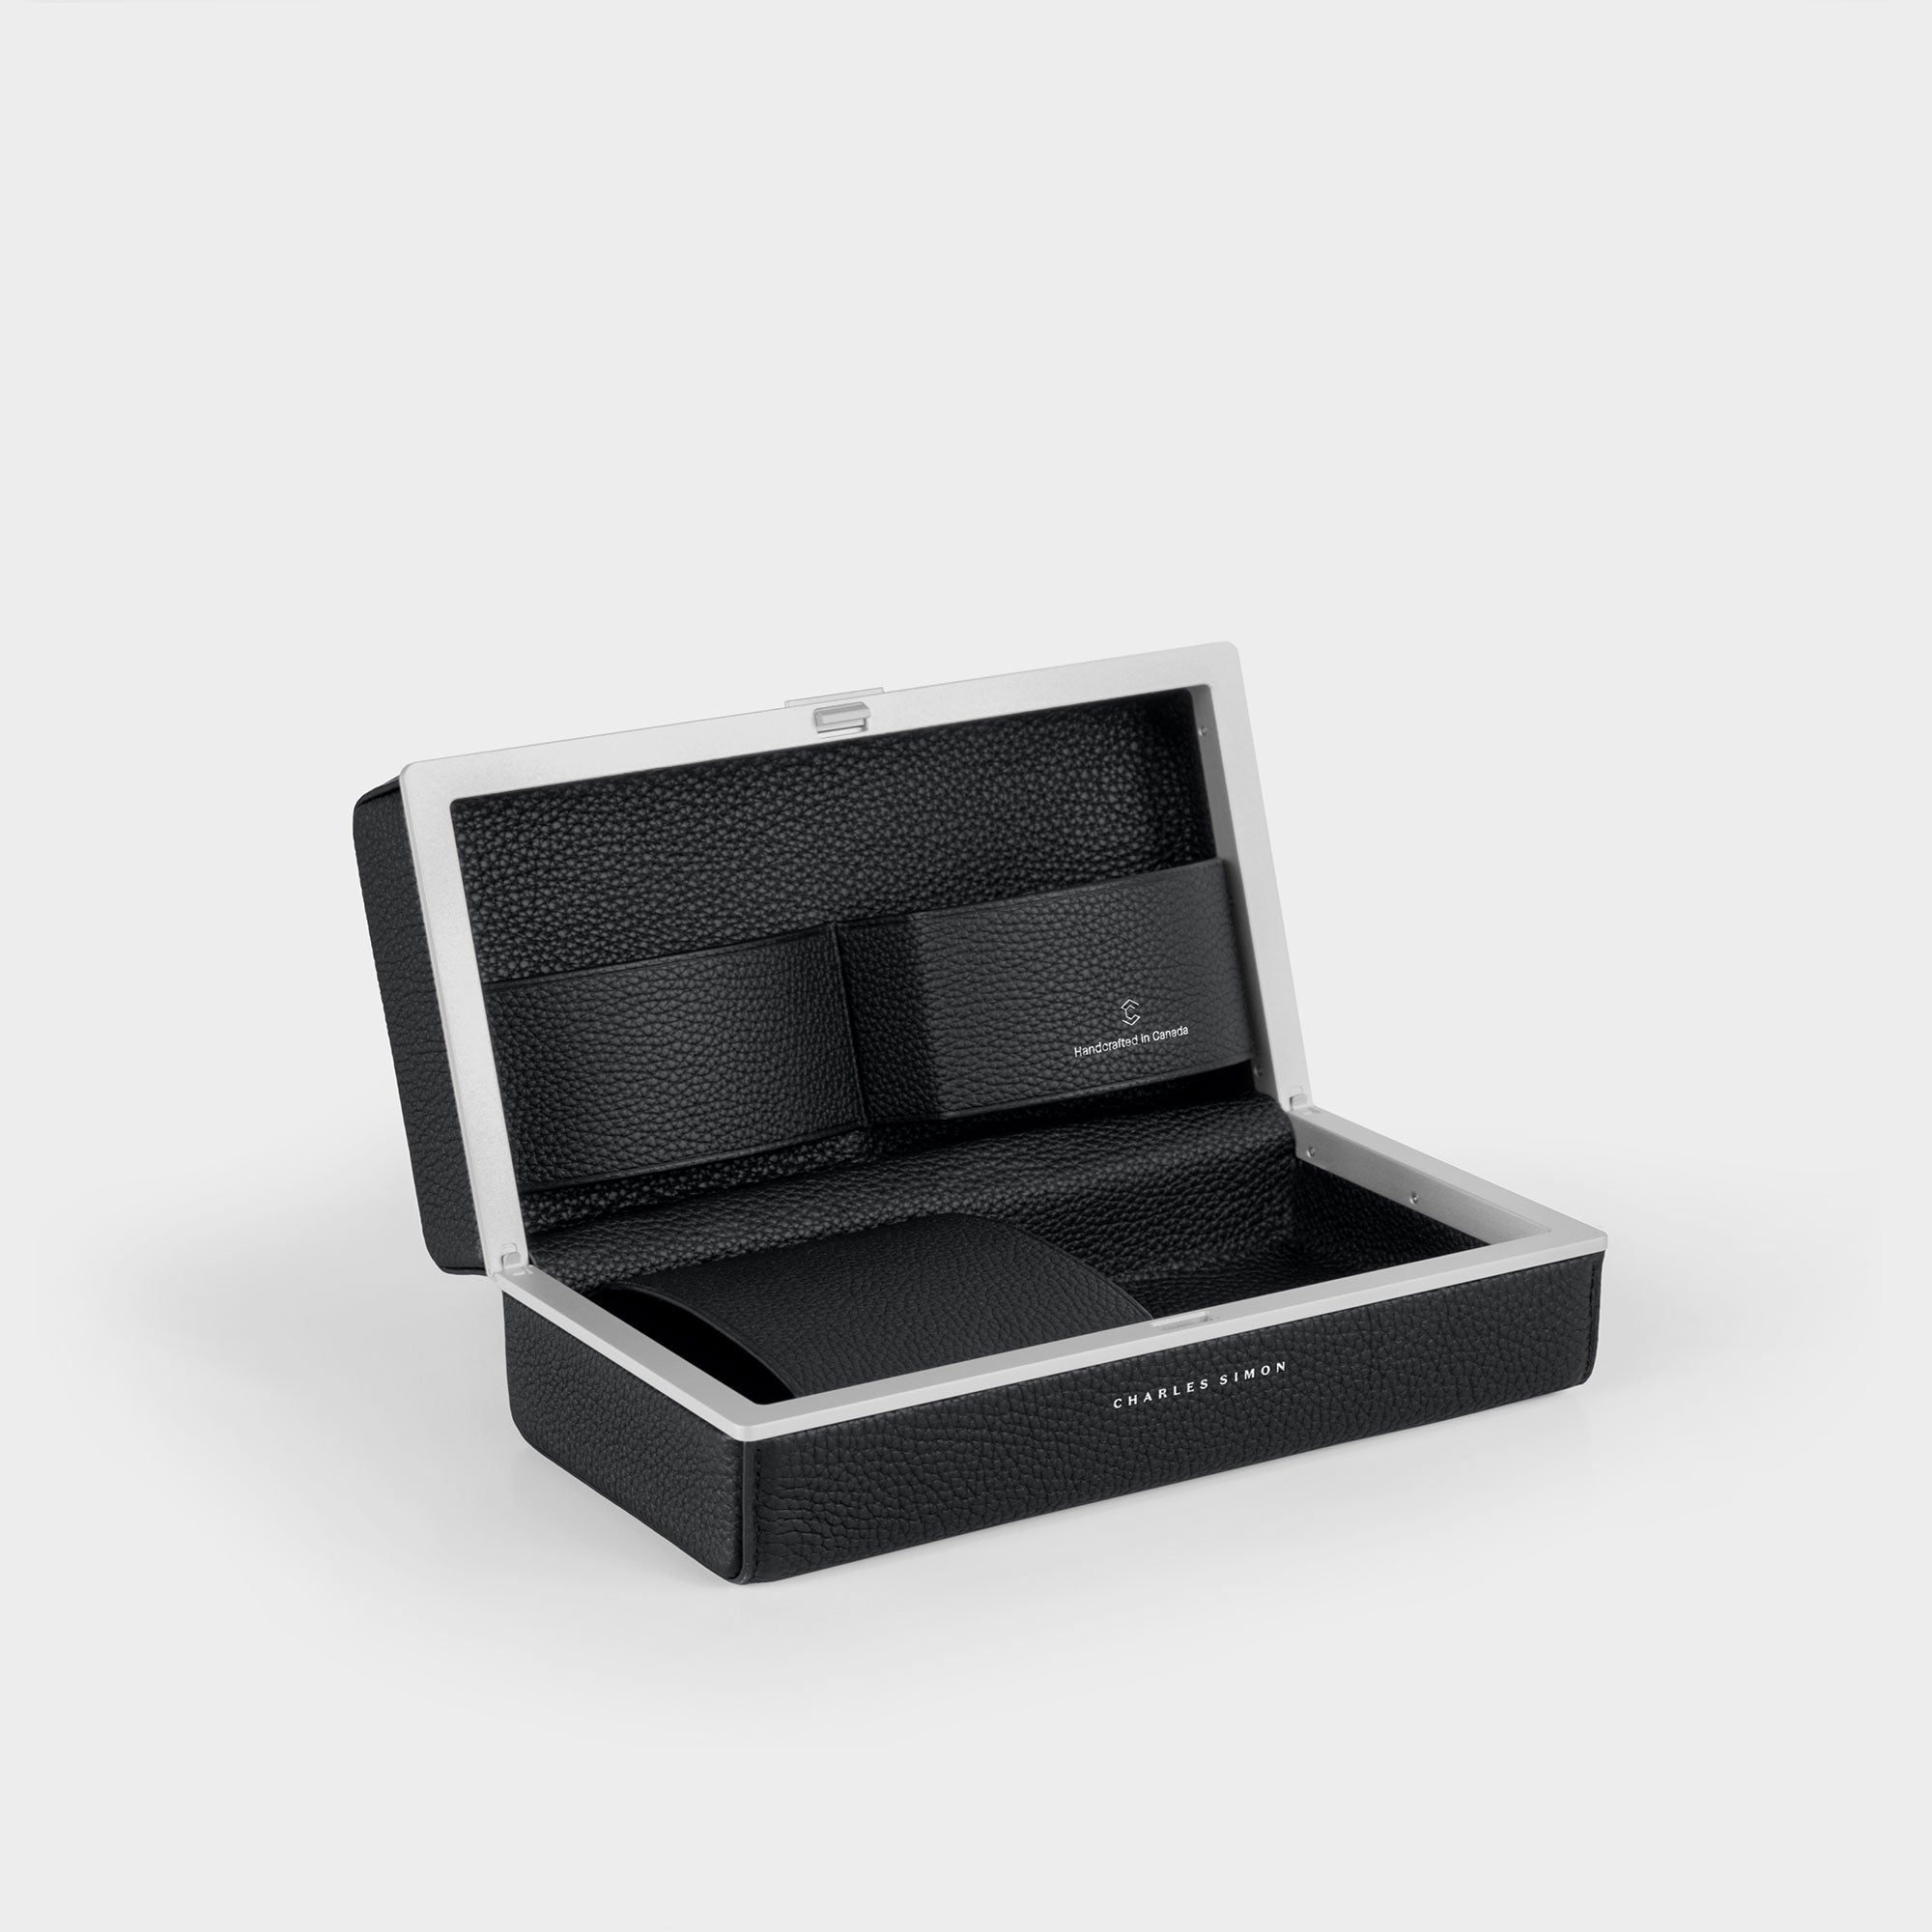 Charles Simon Moraine toiletry case in black interior view showcasing the convenient leather compartments